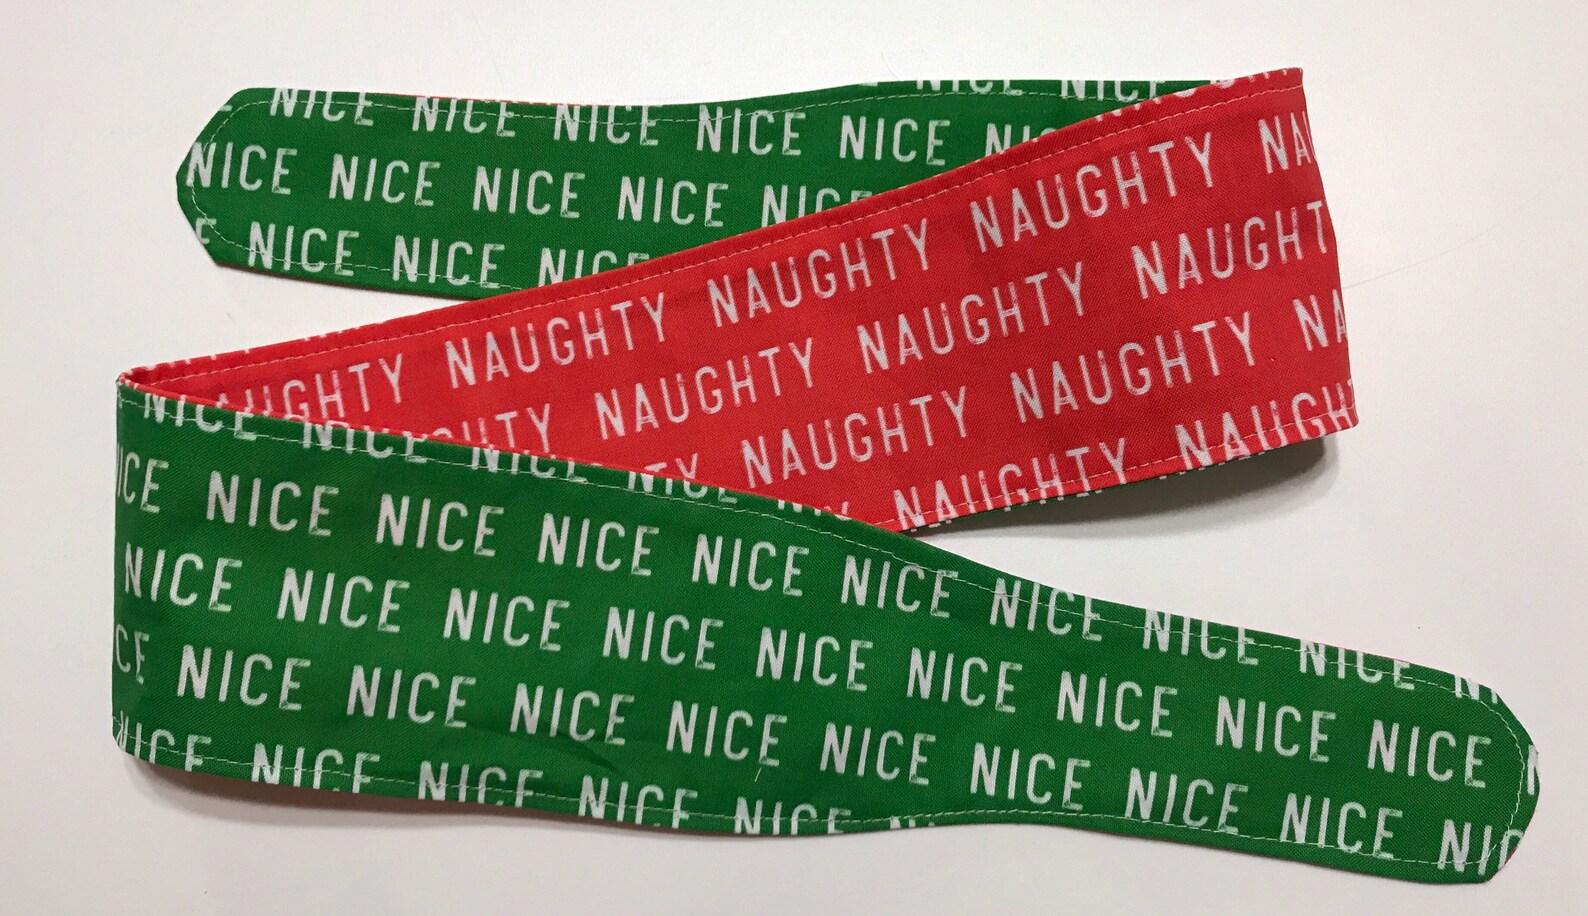 Photo shows how ends are tapered, green Nice and red Naughty sides showing